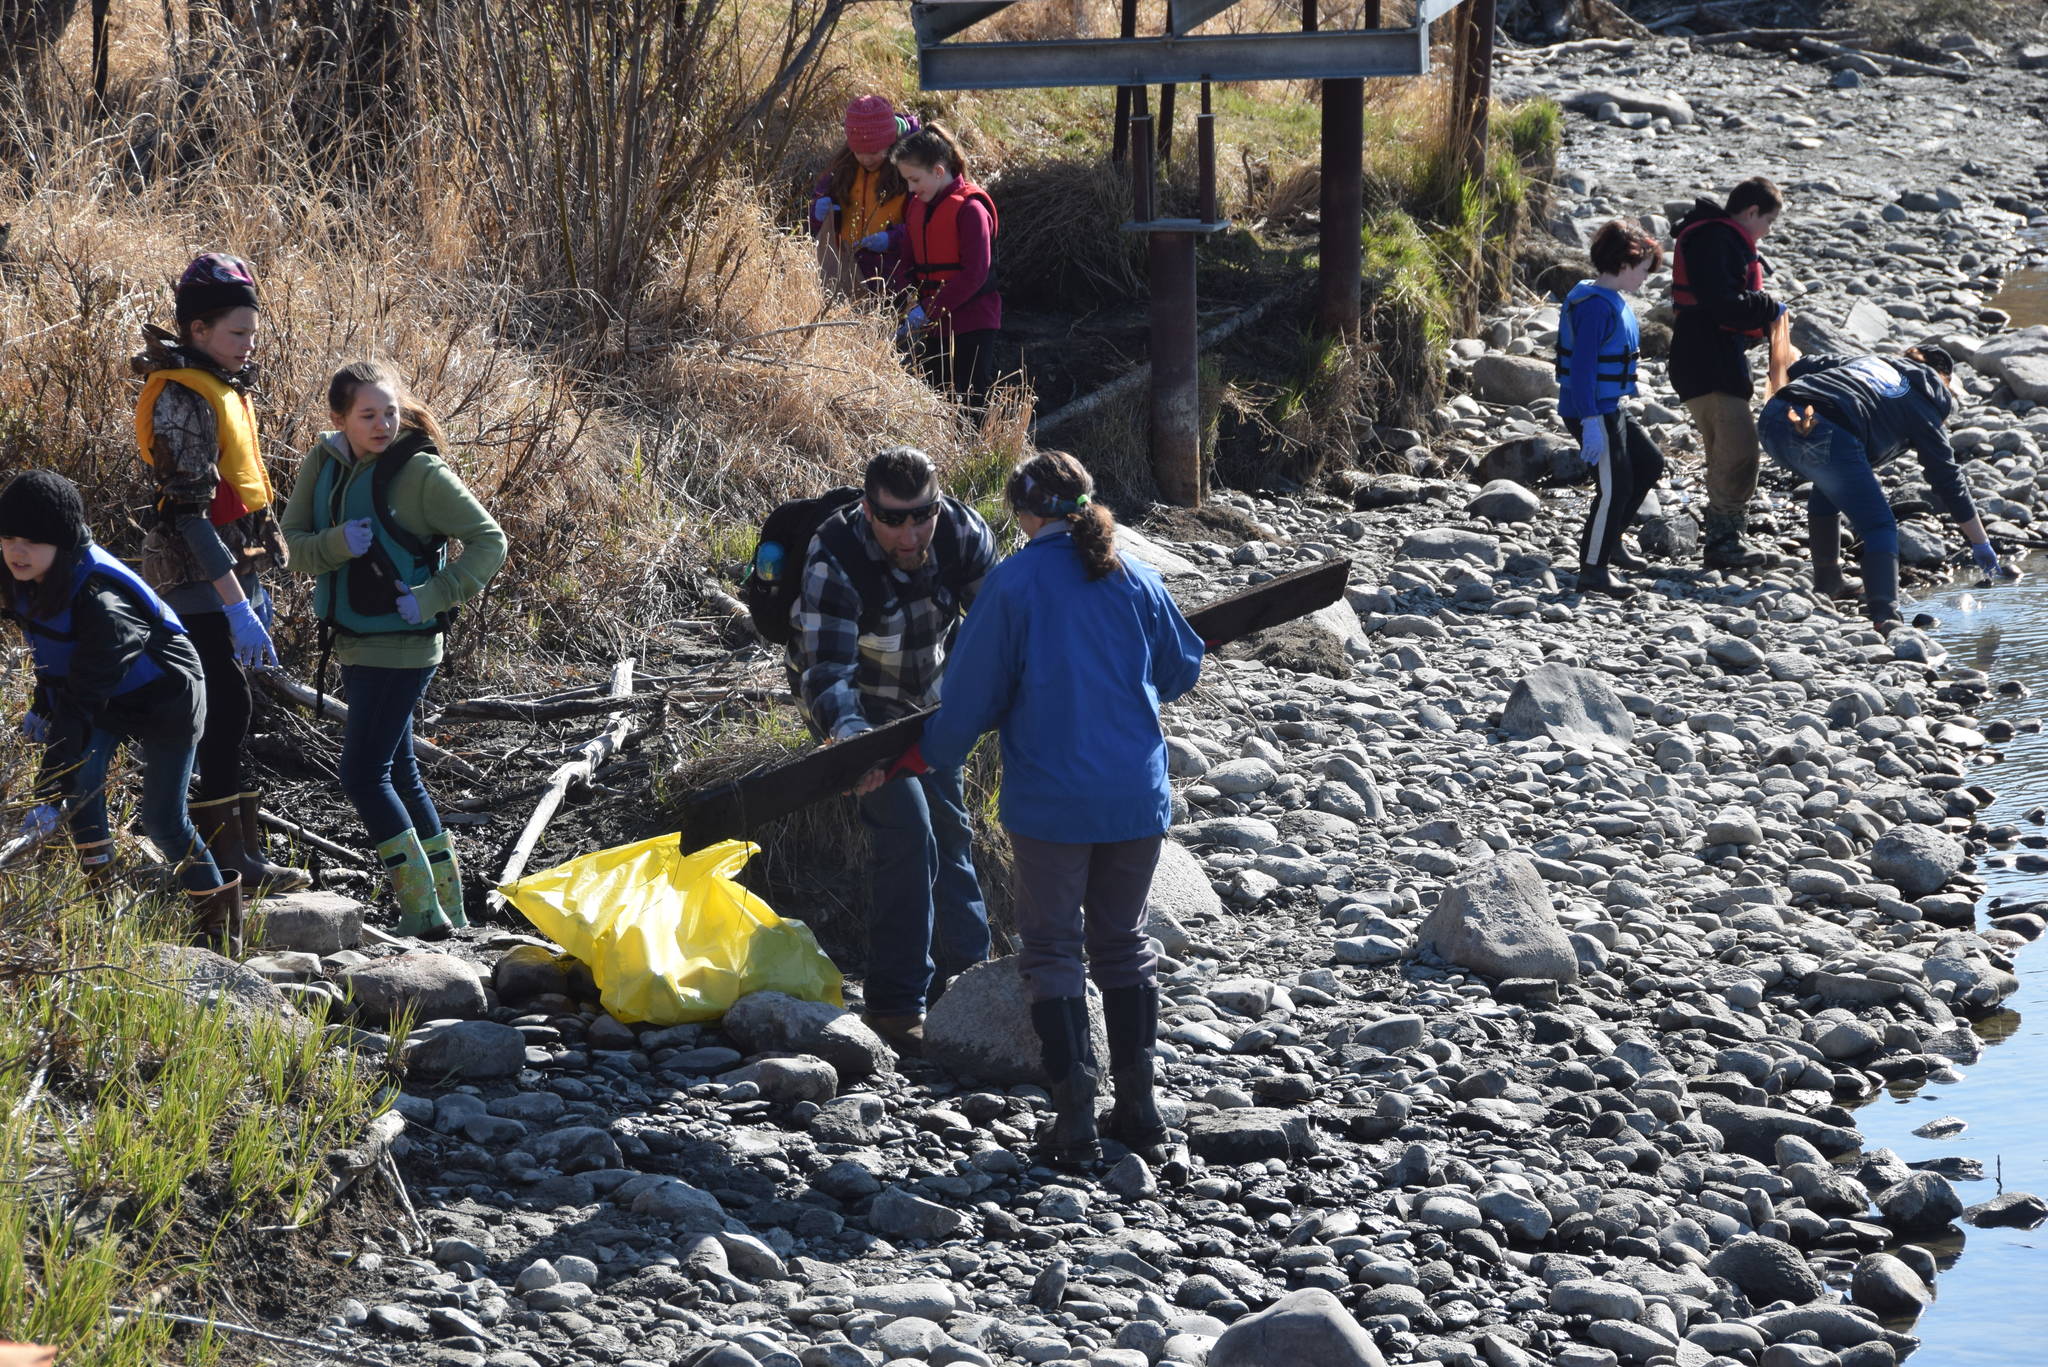 Students from Redoubt Elementary pick up trash along the river during the 6th Annual Kids Kenai River Spring Cleanup at Swiftwater Park in Soldotna, Alaska on May 3, 2019. (Photo by Brian Mazurek/Peninsula Clarion)